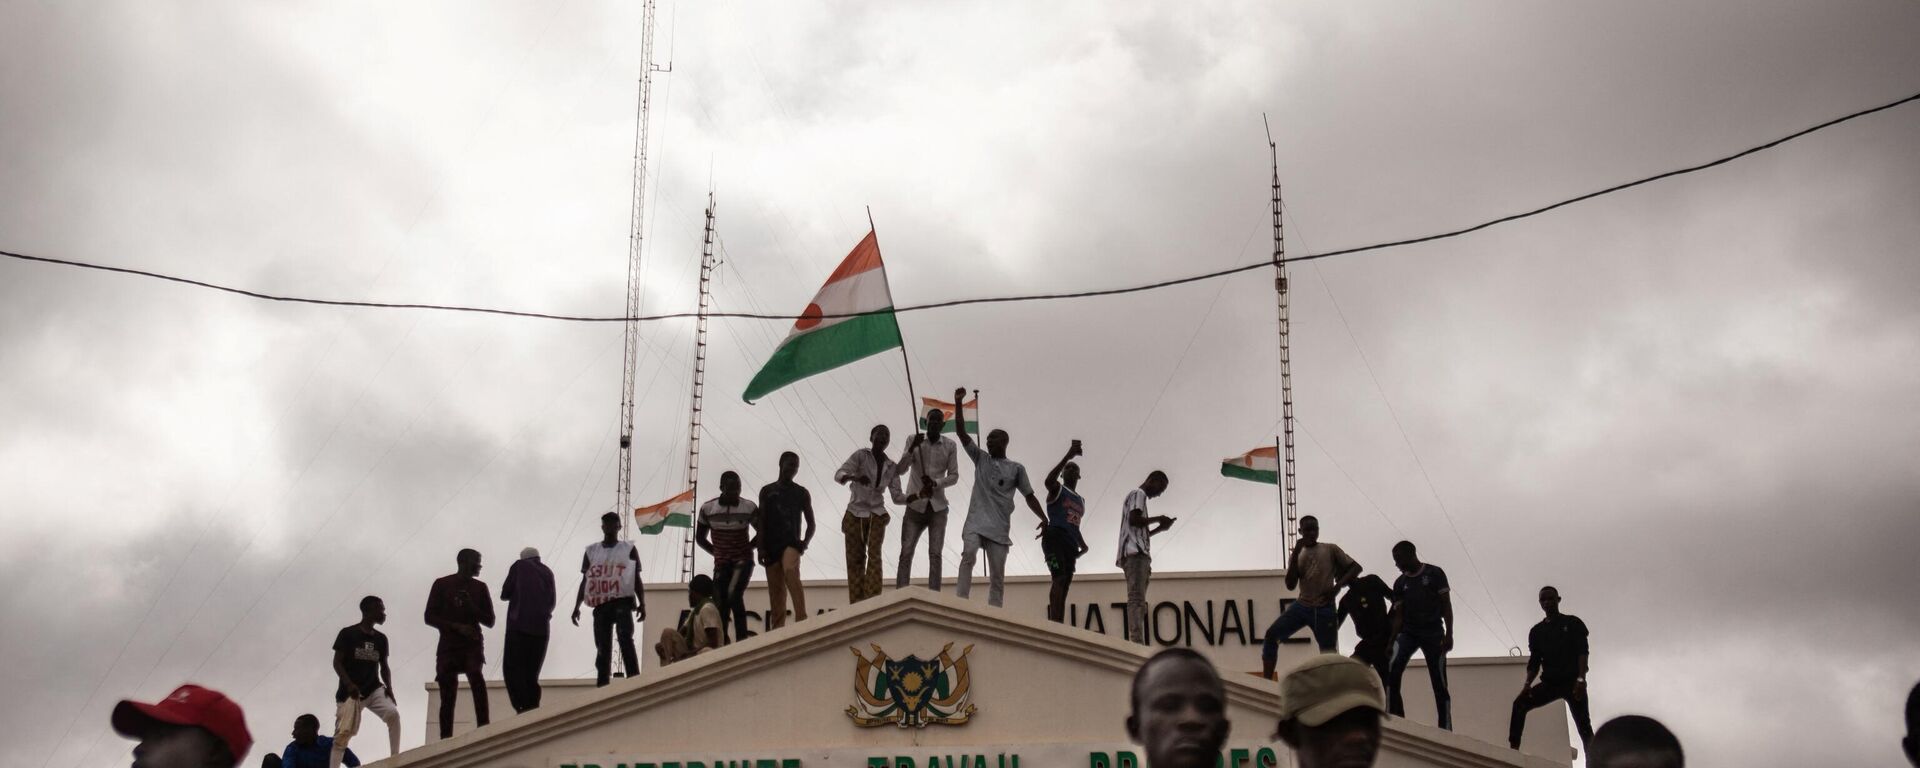 Protesters hold a Niger flag during a demonstration on independence day in Niamey on August 3, 2023. Hundreds of people backing the coup in Niger gathered on August 3, 2023 for a mass rally in the capital Niamey with some brandishing giant Russian flags. - Sputnik Србија, 1920, 25.08.2023